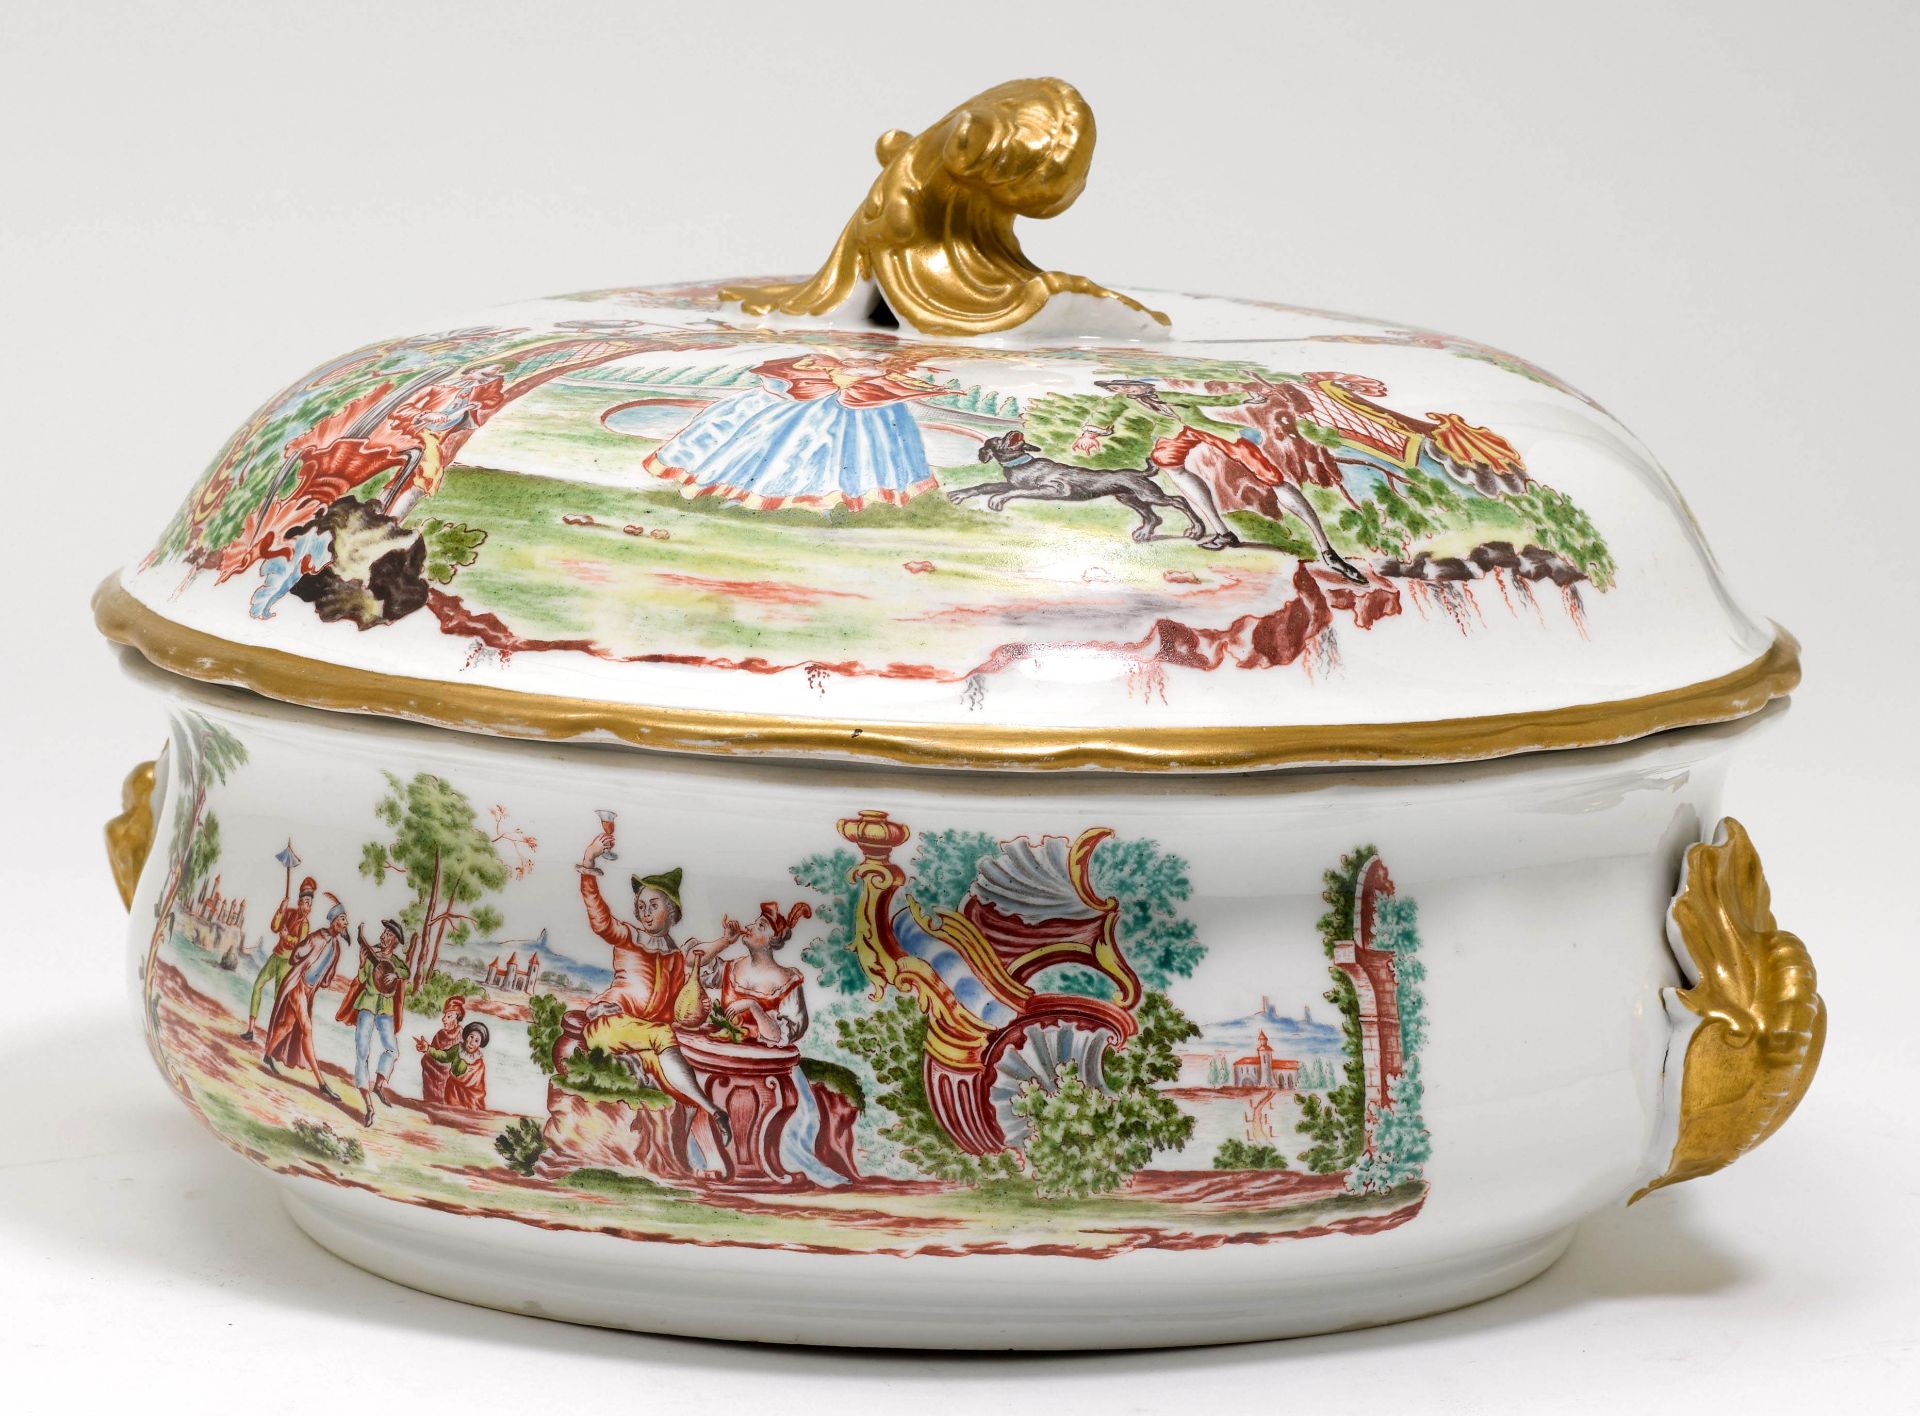 A LARGE TUREEN WITH "FÈTE GALANTES” HAUSMALER DECORATION - Image 2 of 5